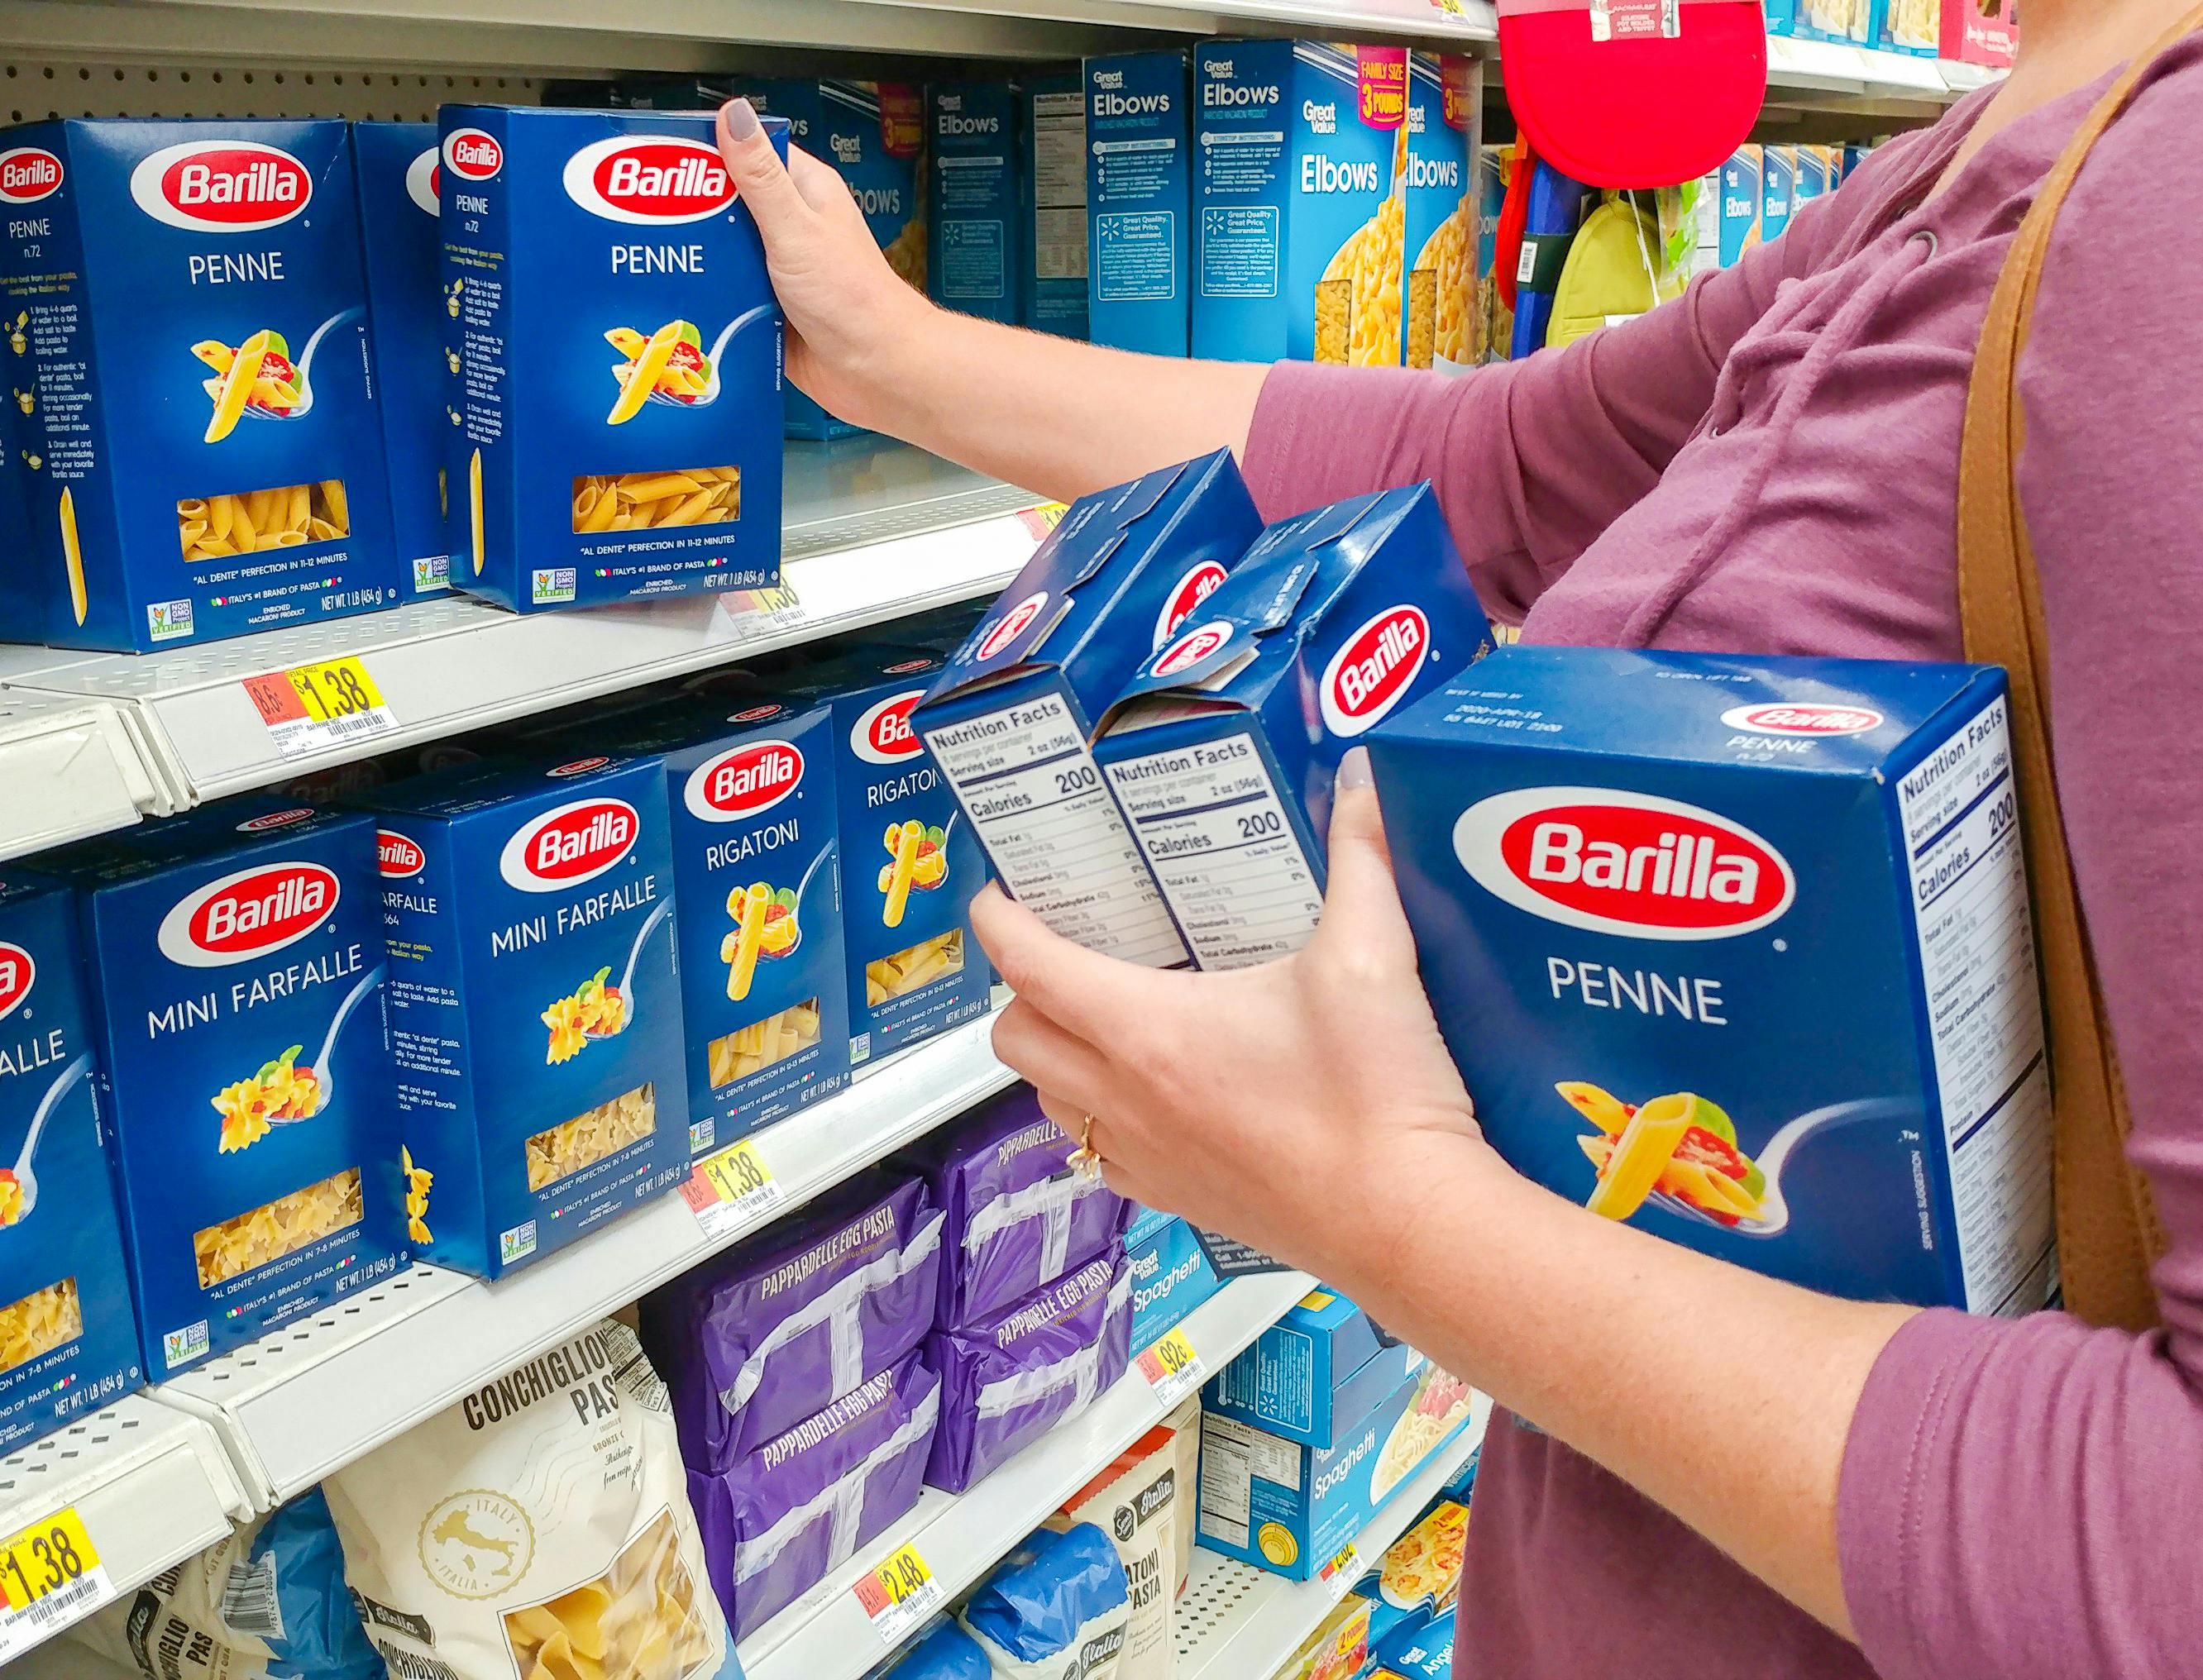 A woman taking boxes of Barilla pasta from a shelf in a grocery store.